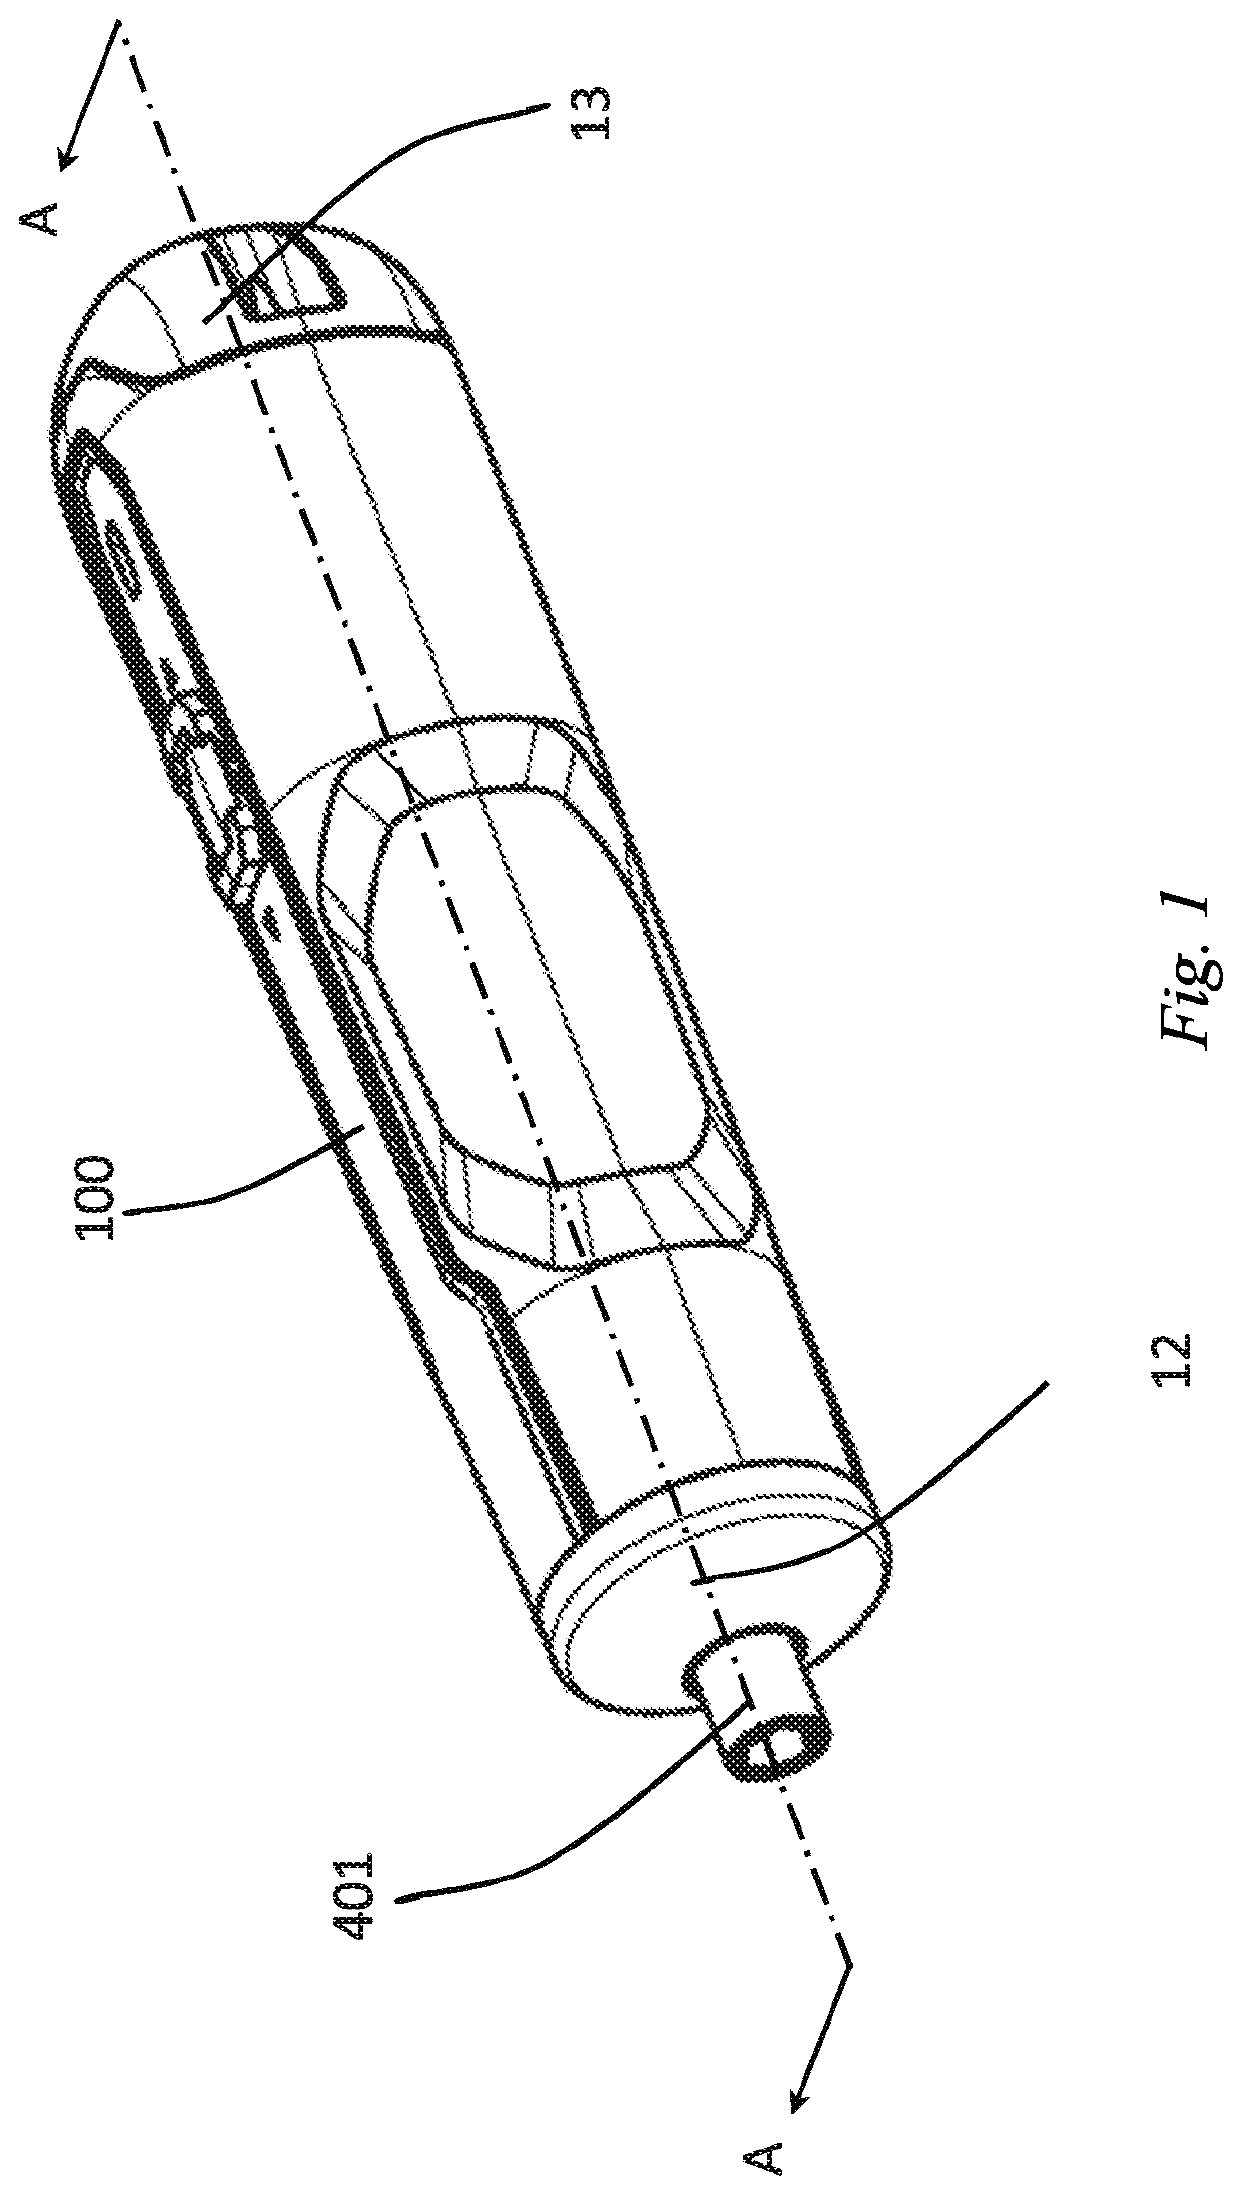 Cage Assembly and Electrically Powered Tool Having Cage